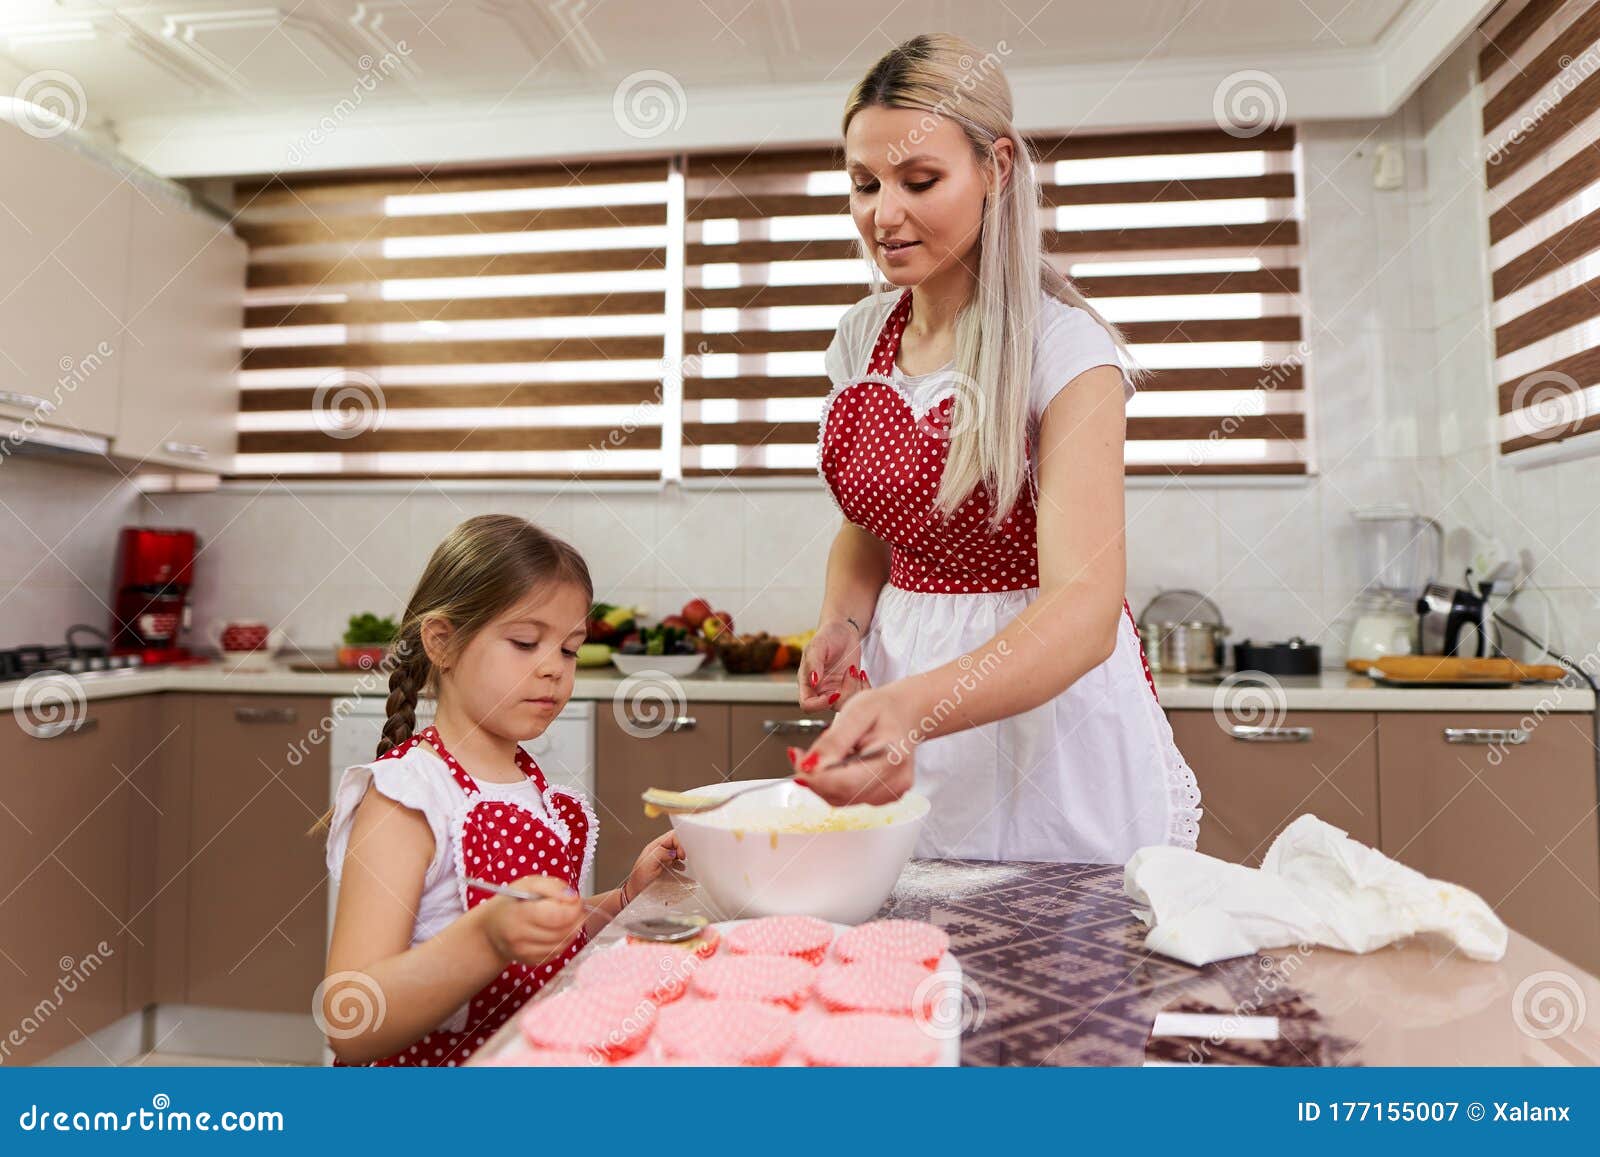 Mother And Daughter In The Kitchen Stock Image Image Of Preparation Cook 177155007 